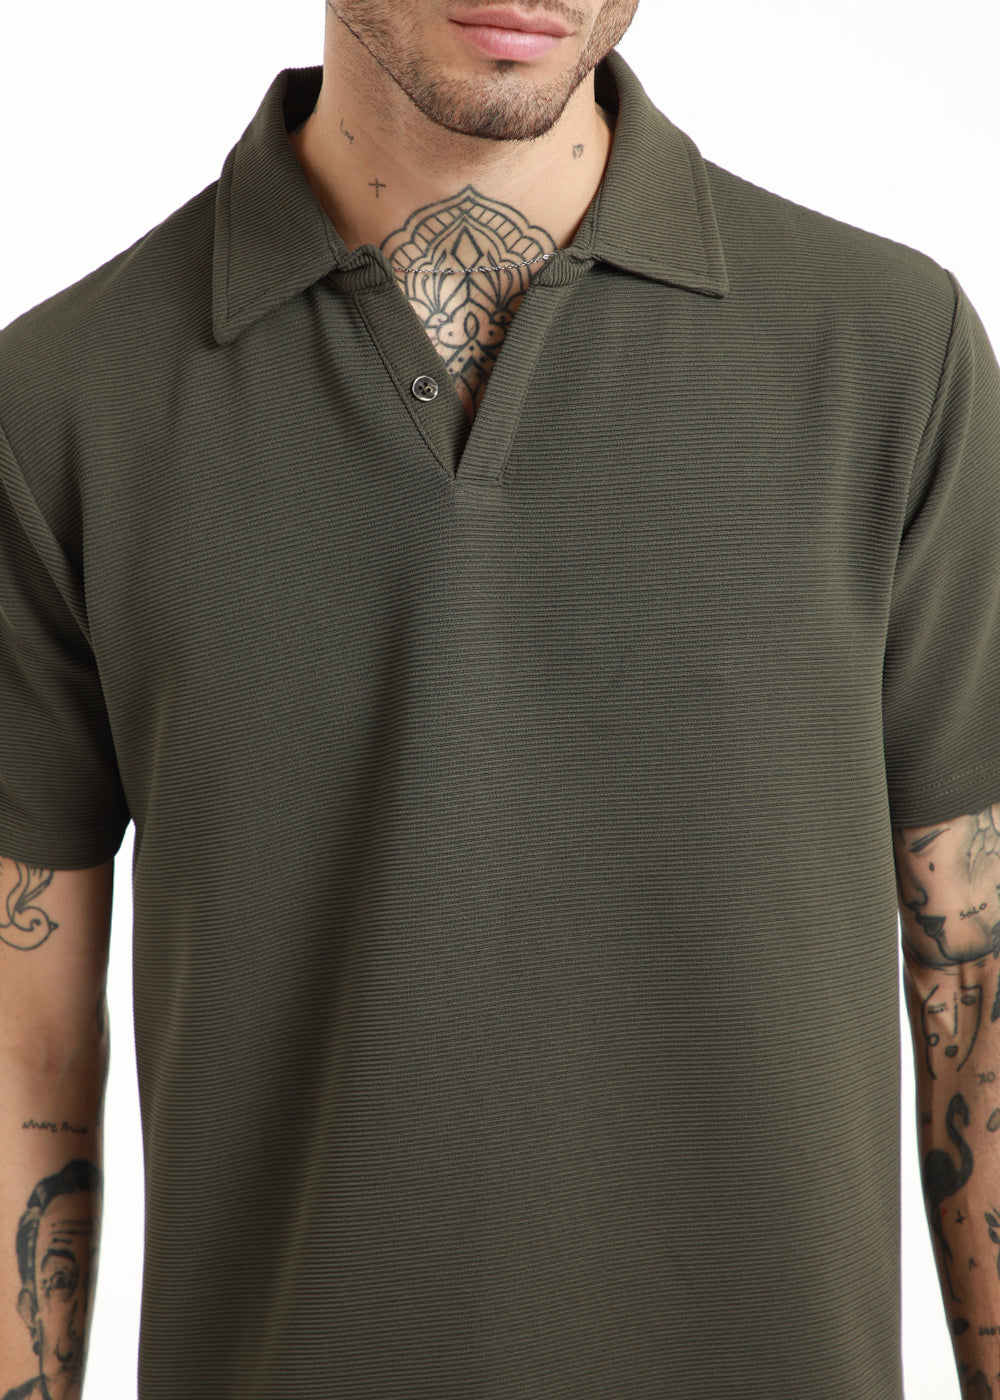 Olive Green Textured Polo Tshirt